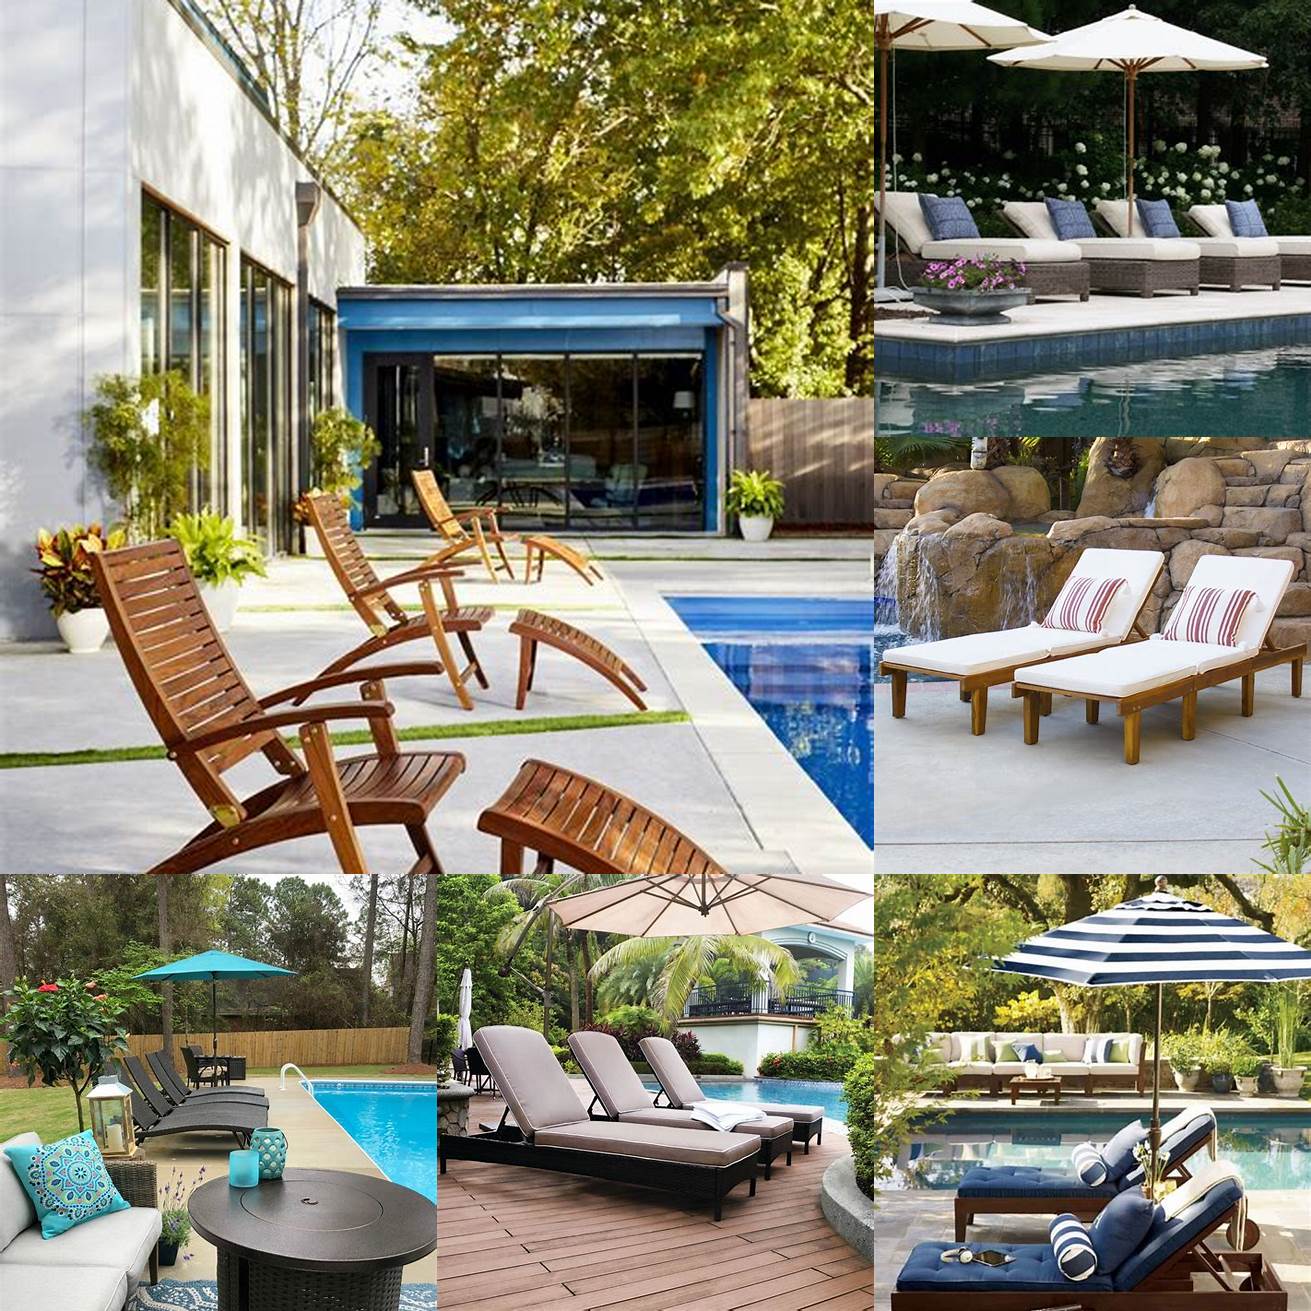 A Poolside with Ipe Furniture